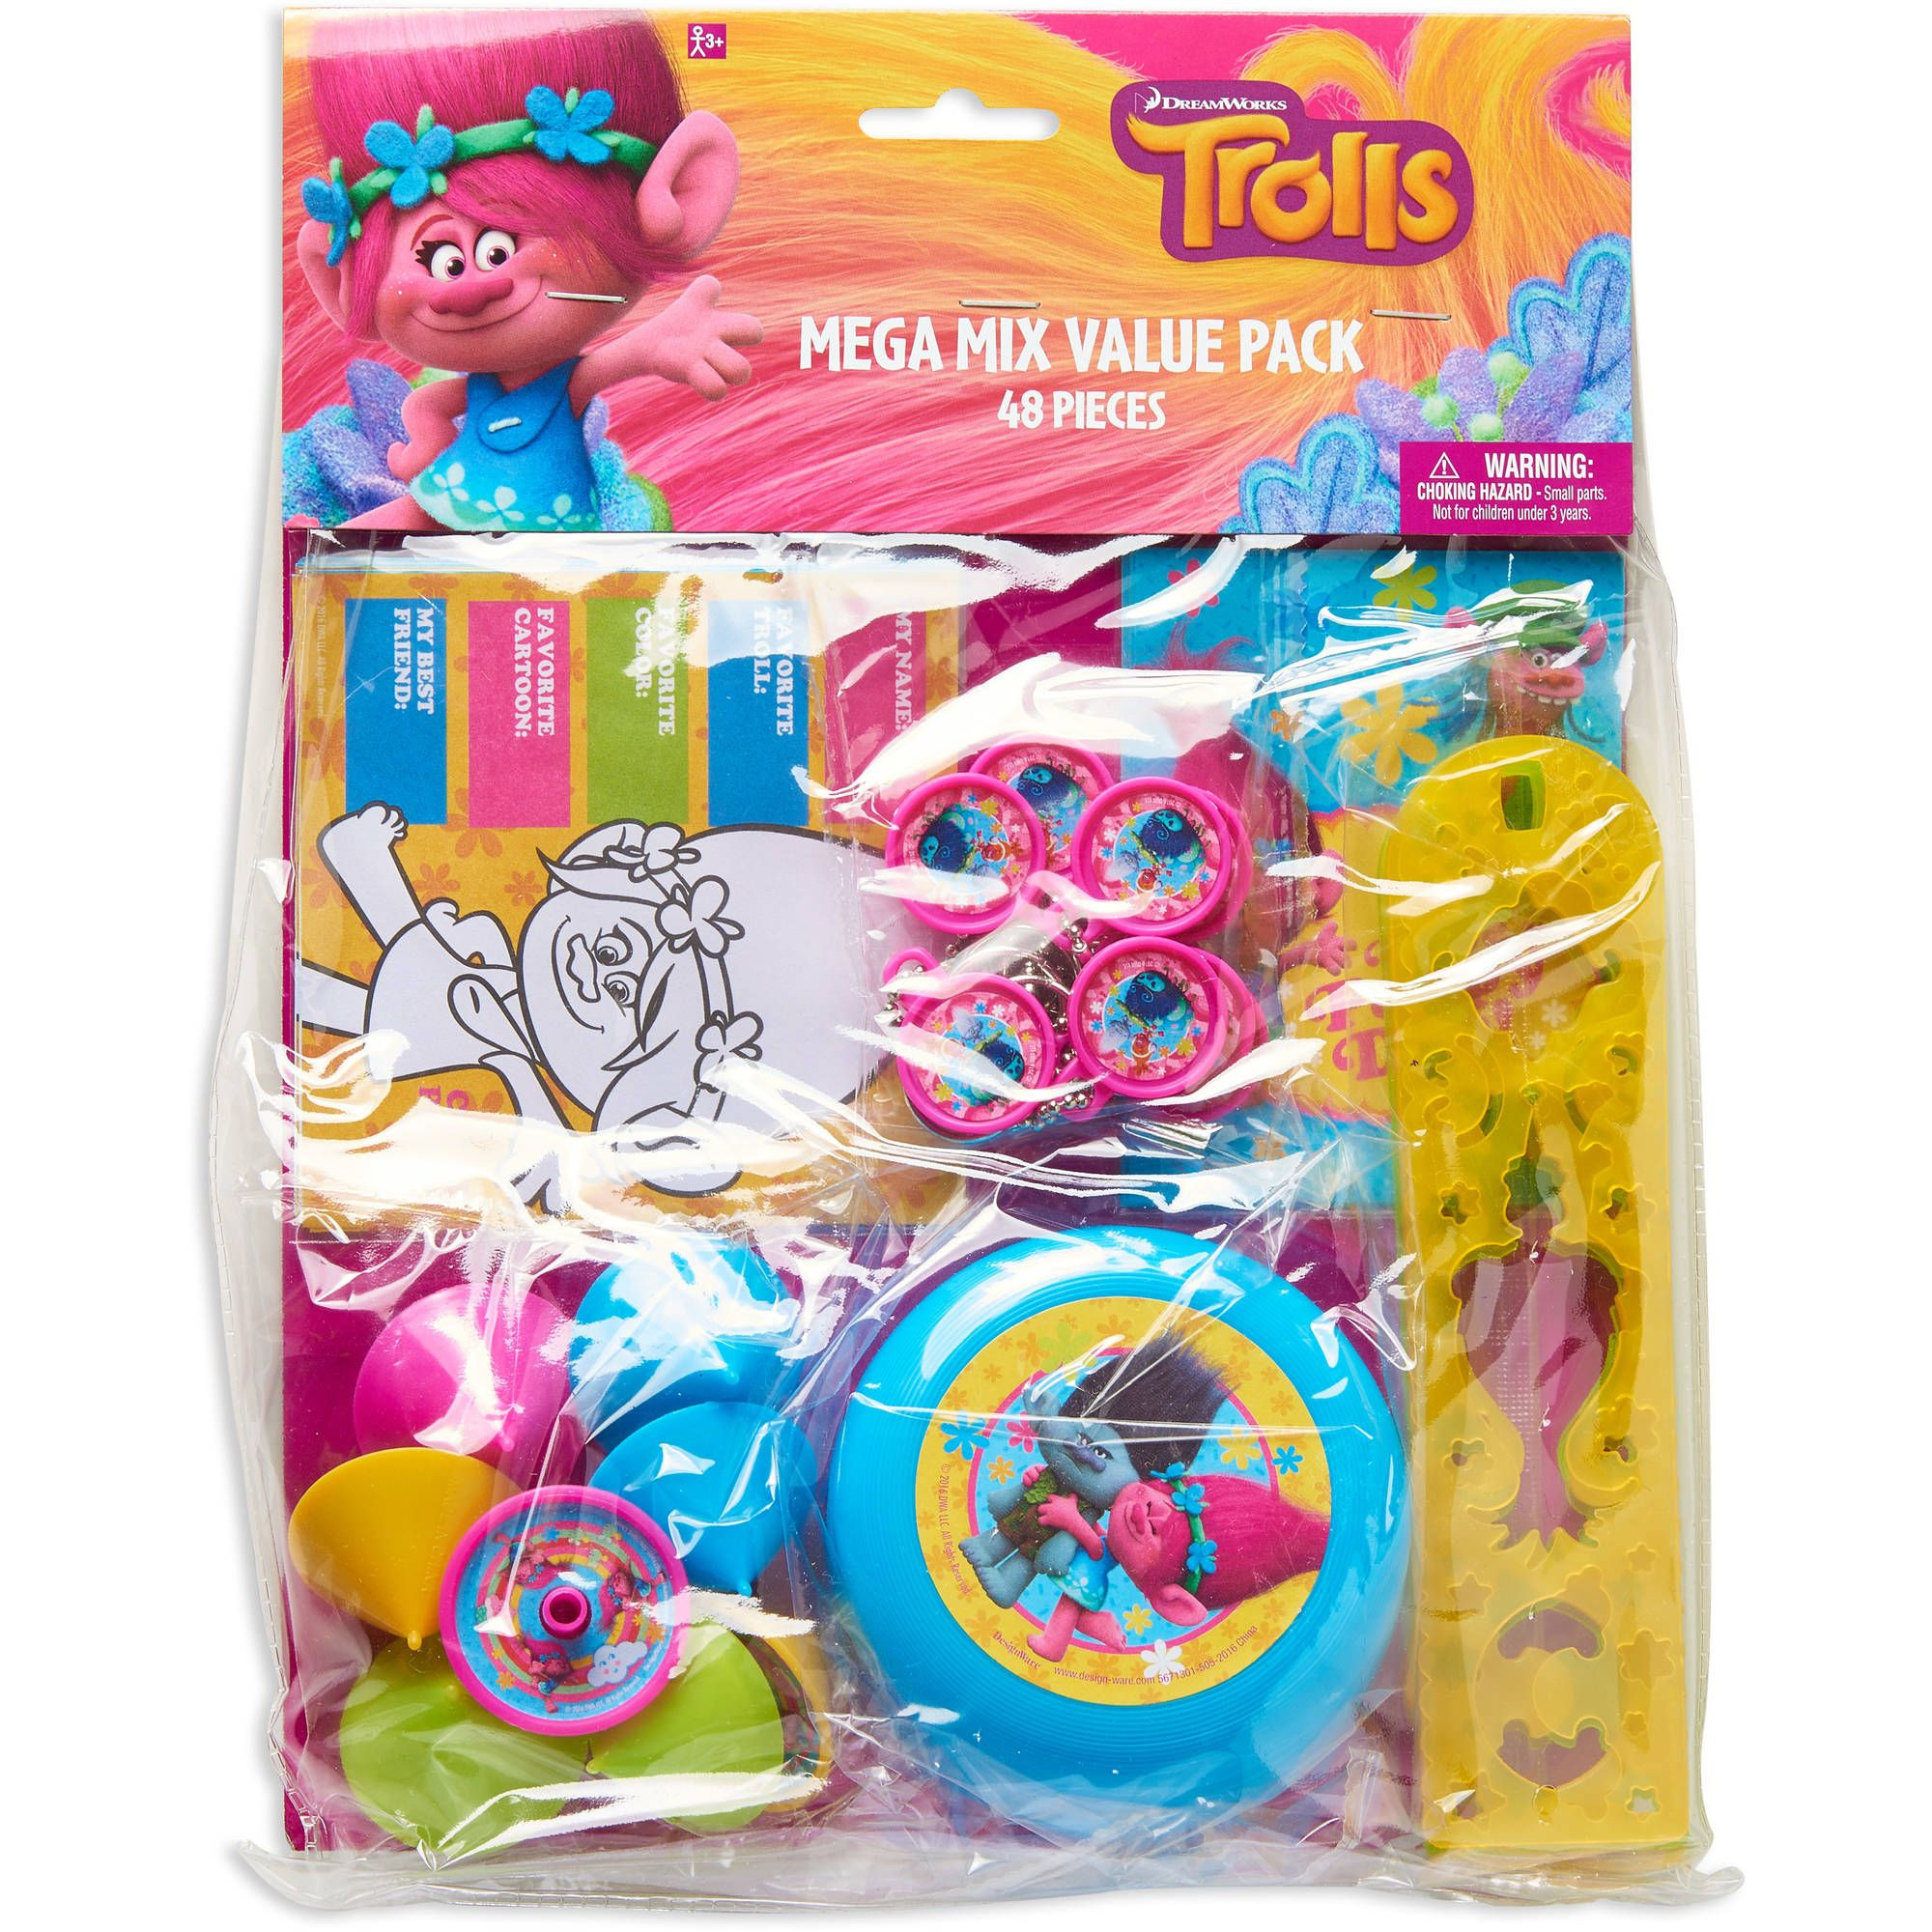 Trolls Party Ideas Party City
 Pin on Spunky Little Poppy Birthday Cakes and Party Ideas